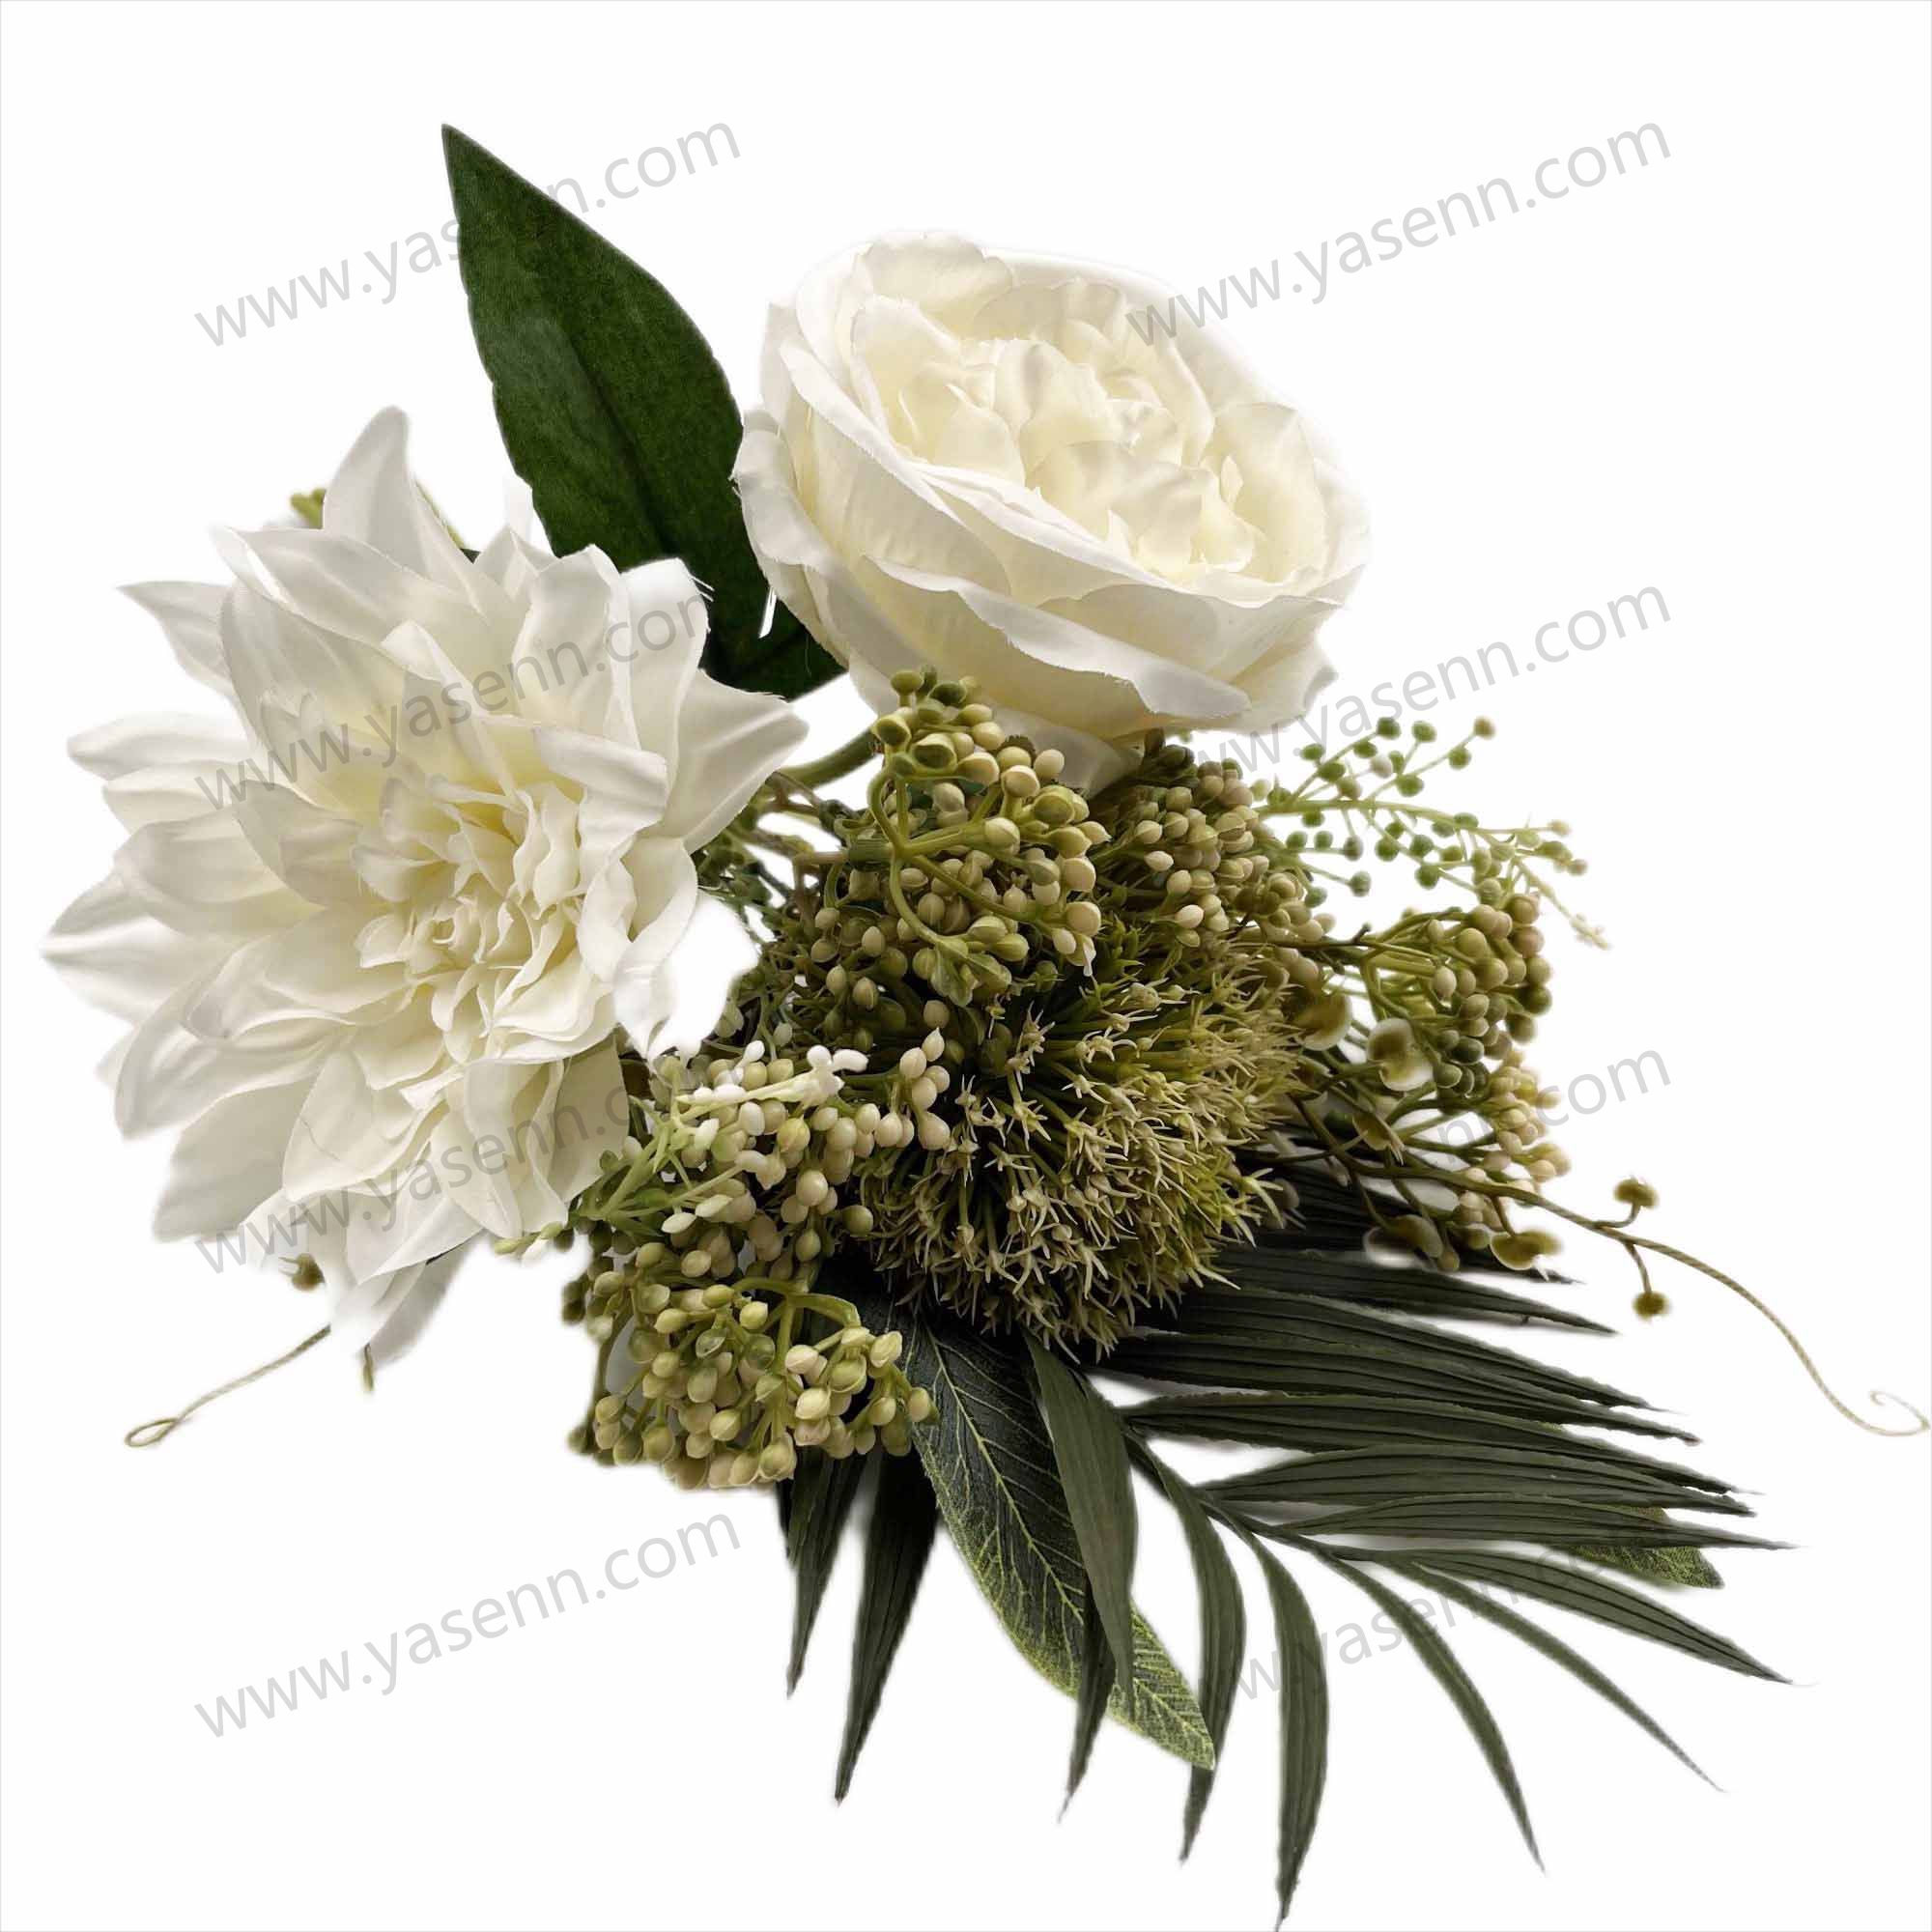 7 BRANCHES PEONY bridal bouquet artificial flowers YSB23177